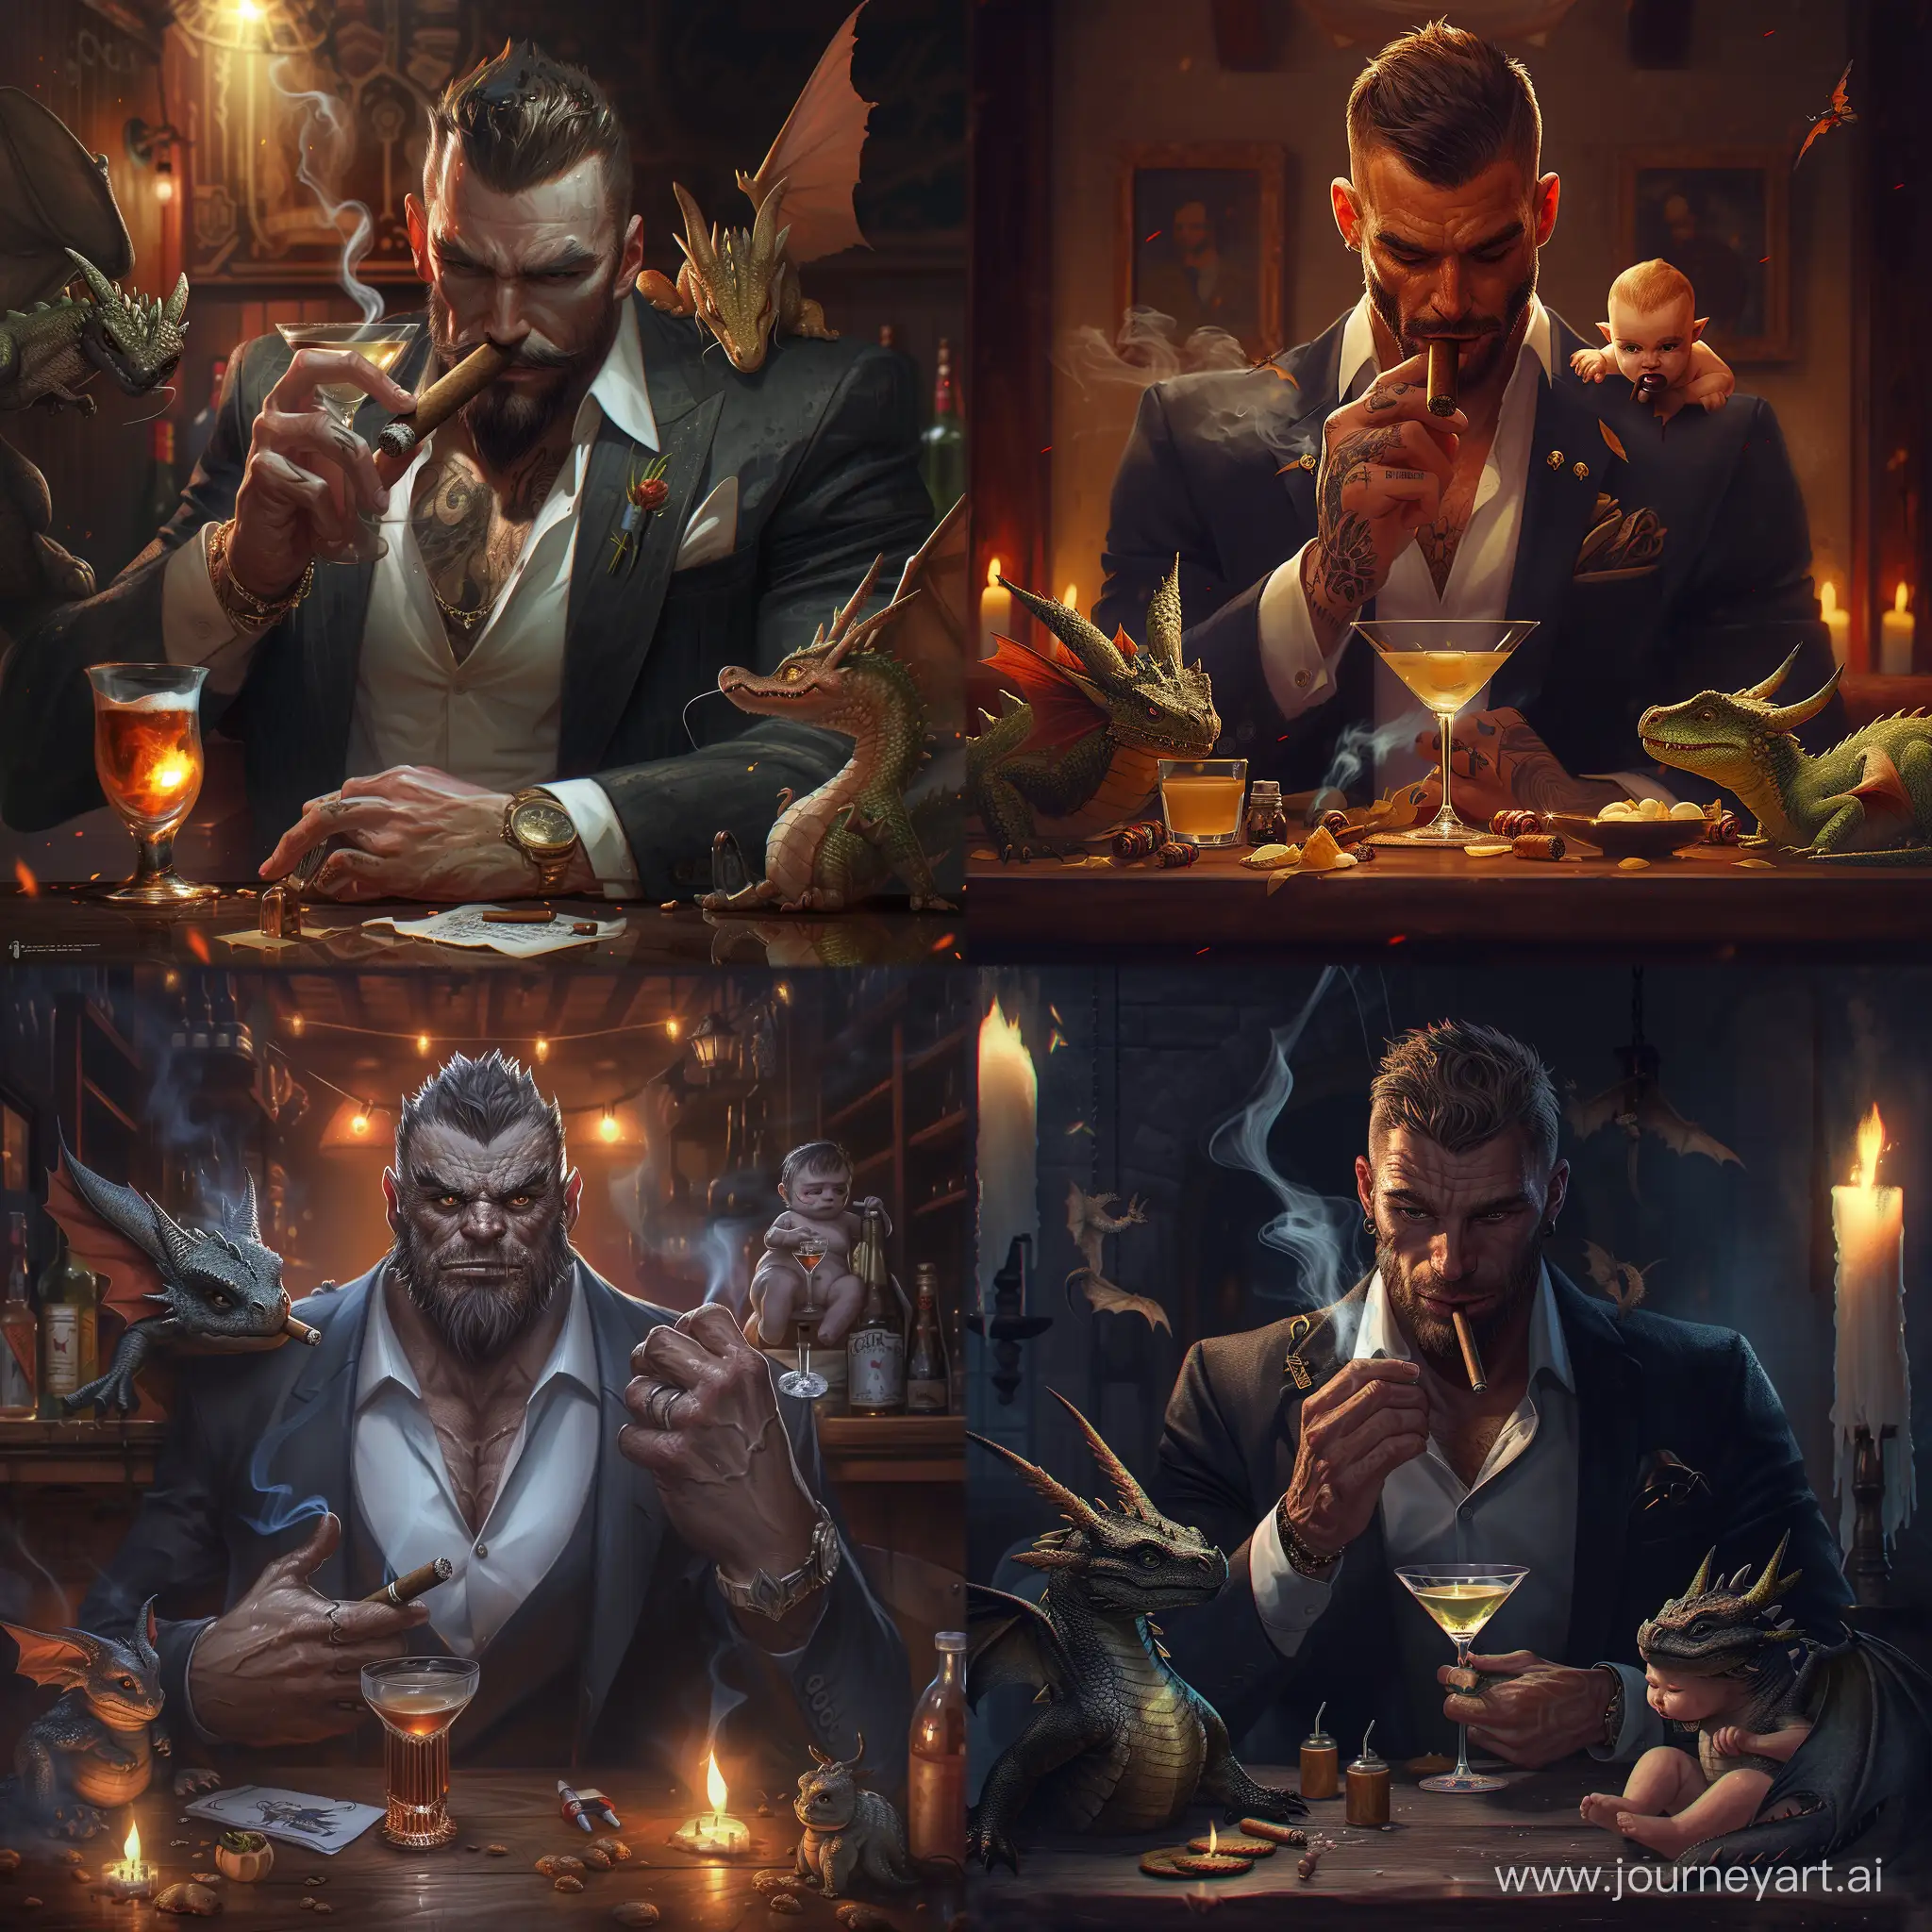 Sleek-Businessman-in-a-Tavern-Surrounded-by-Adorable-Dragon-Hatchlings